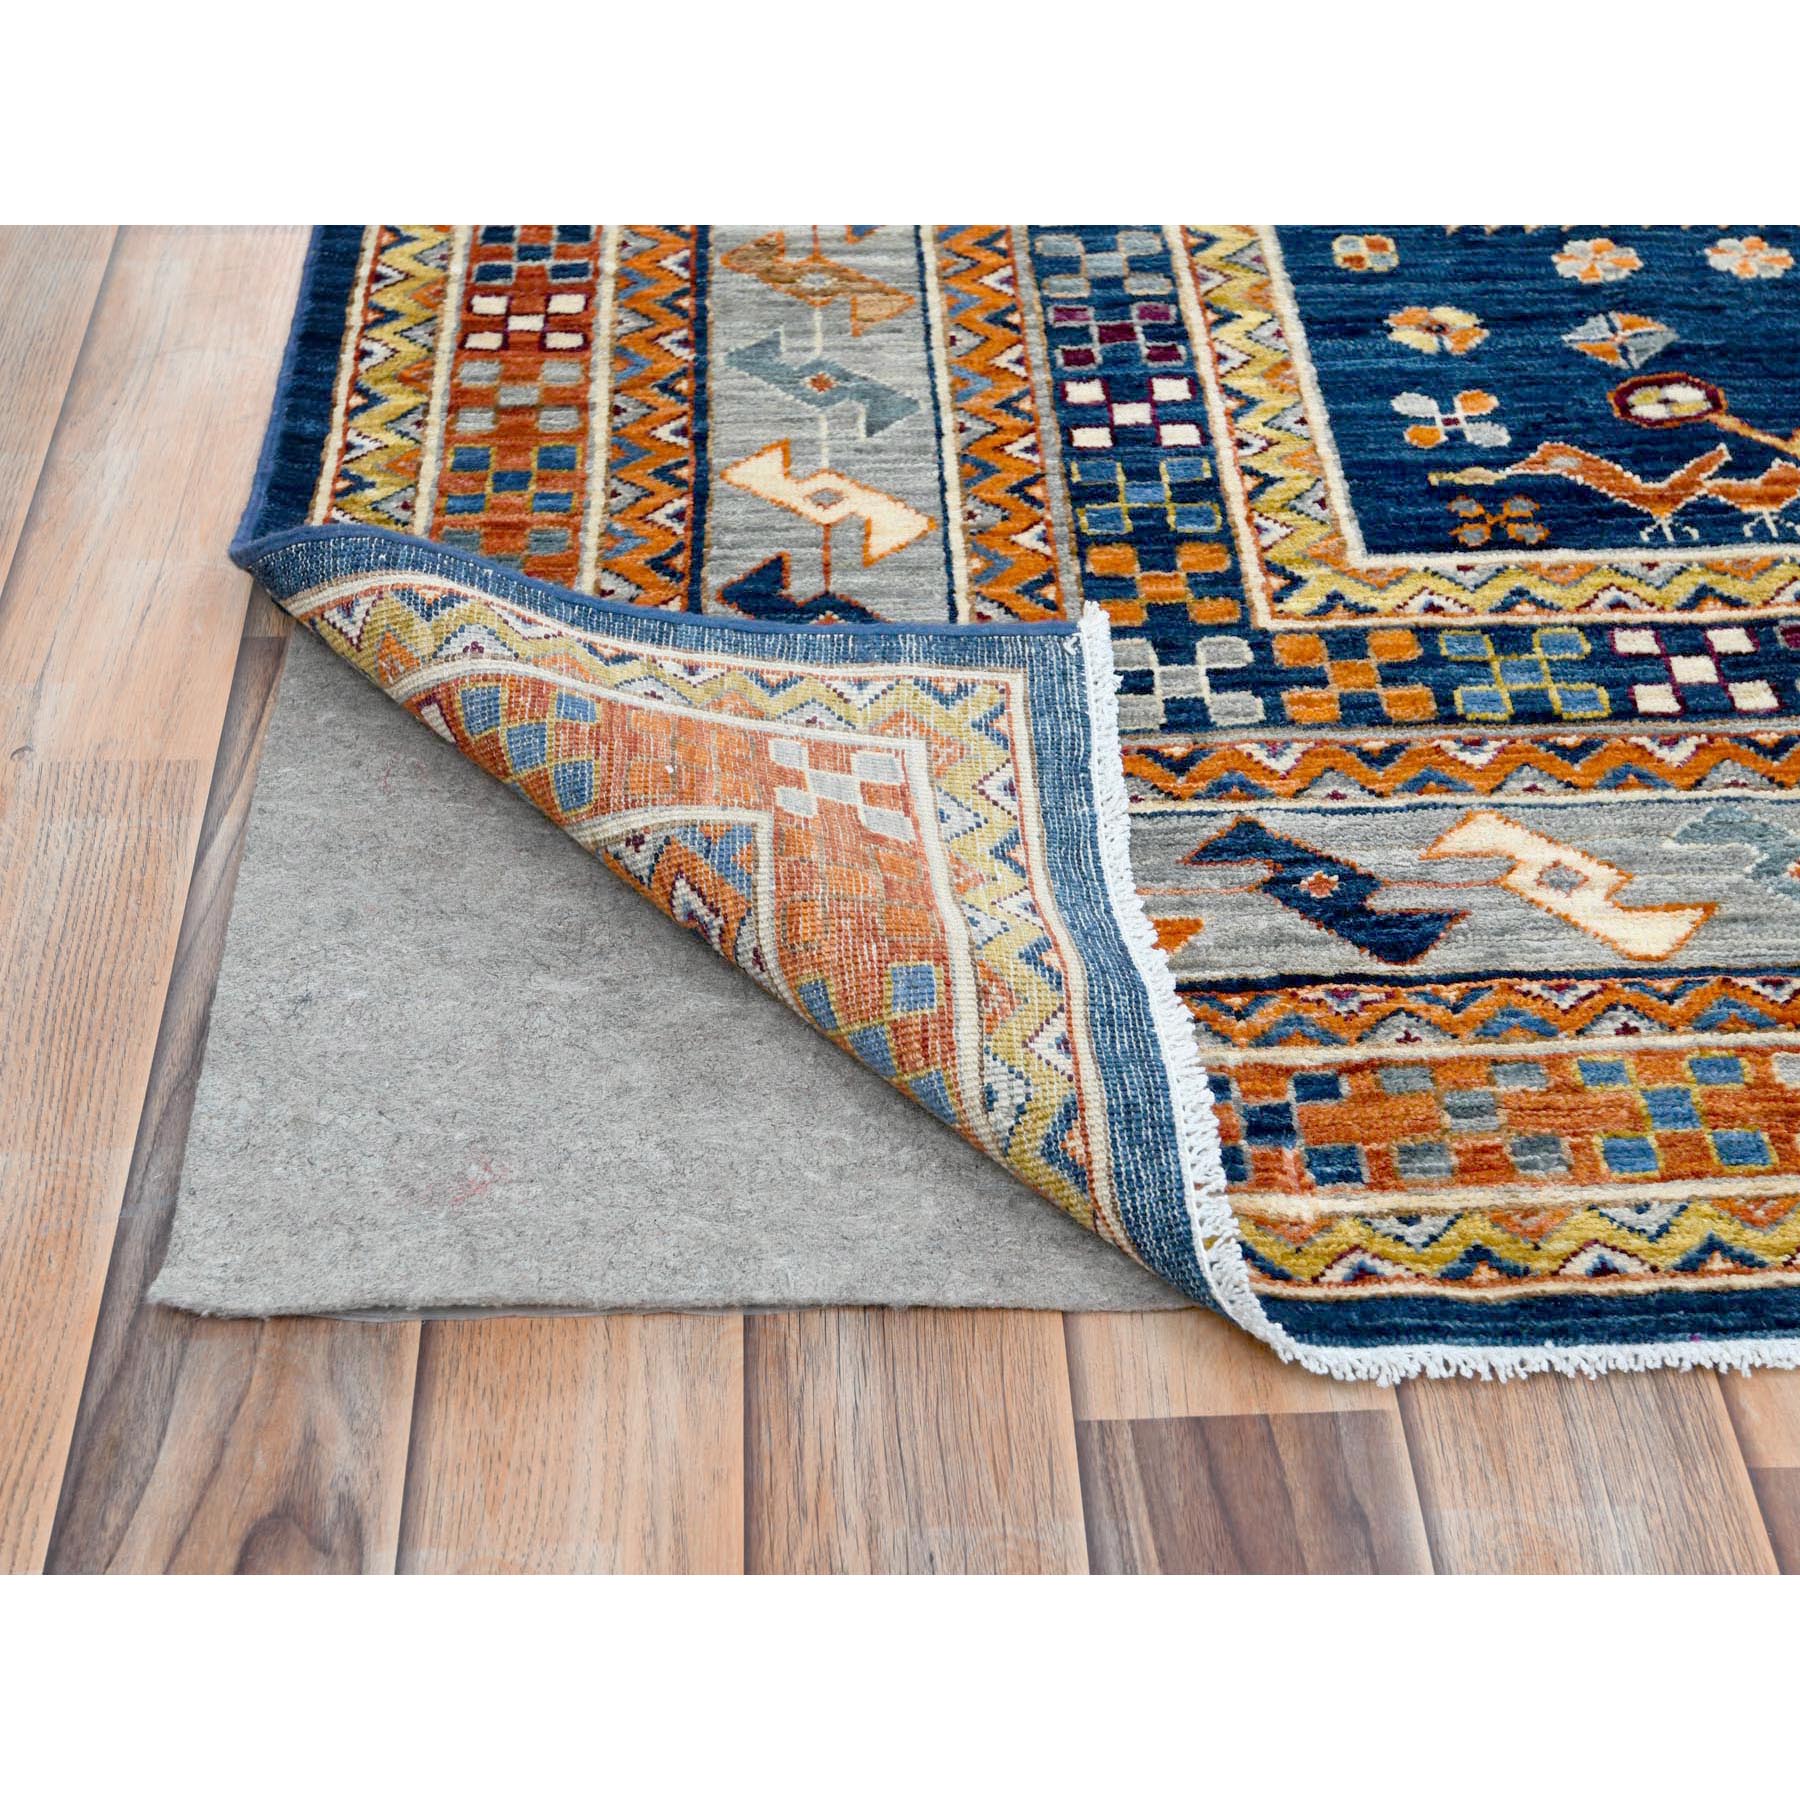 8'4"x9'7" Navy Blue, Natural Dyes Densely Woven, Natural Wool Hand Woven, Armenian Inspired Caucasian Design with Bird Figurines 200 KPSI, Oriental Rug 